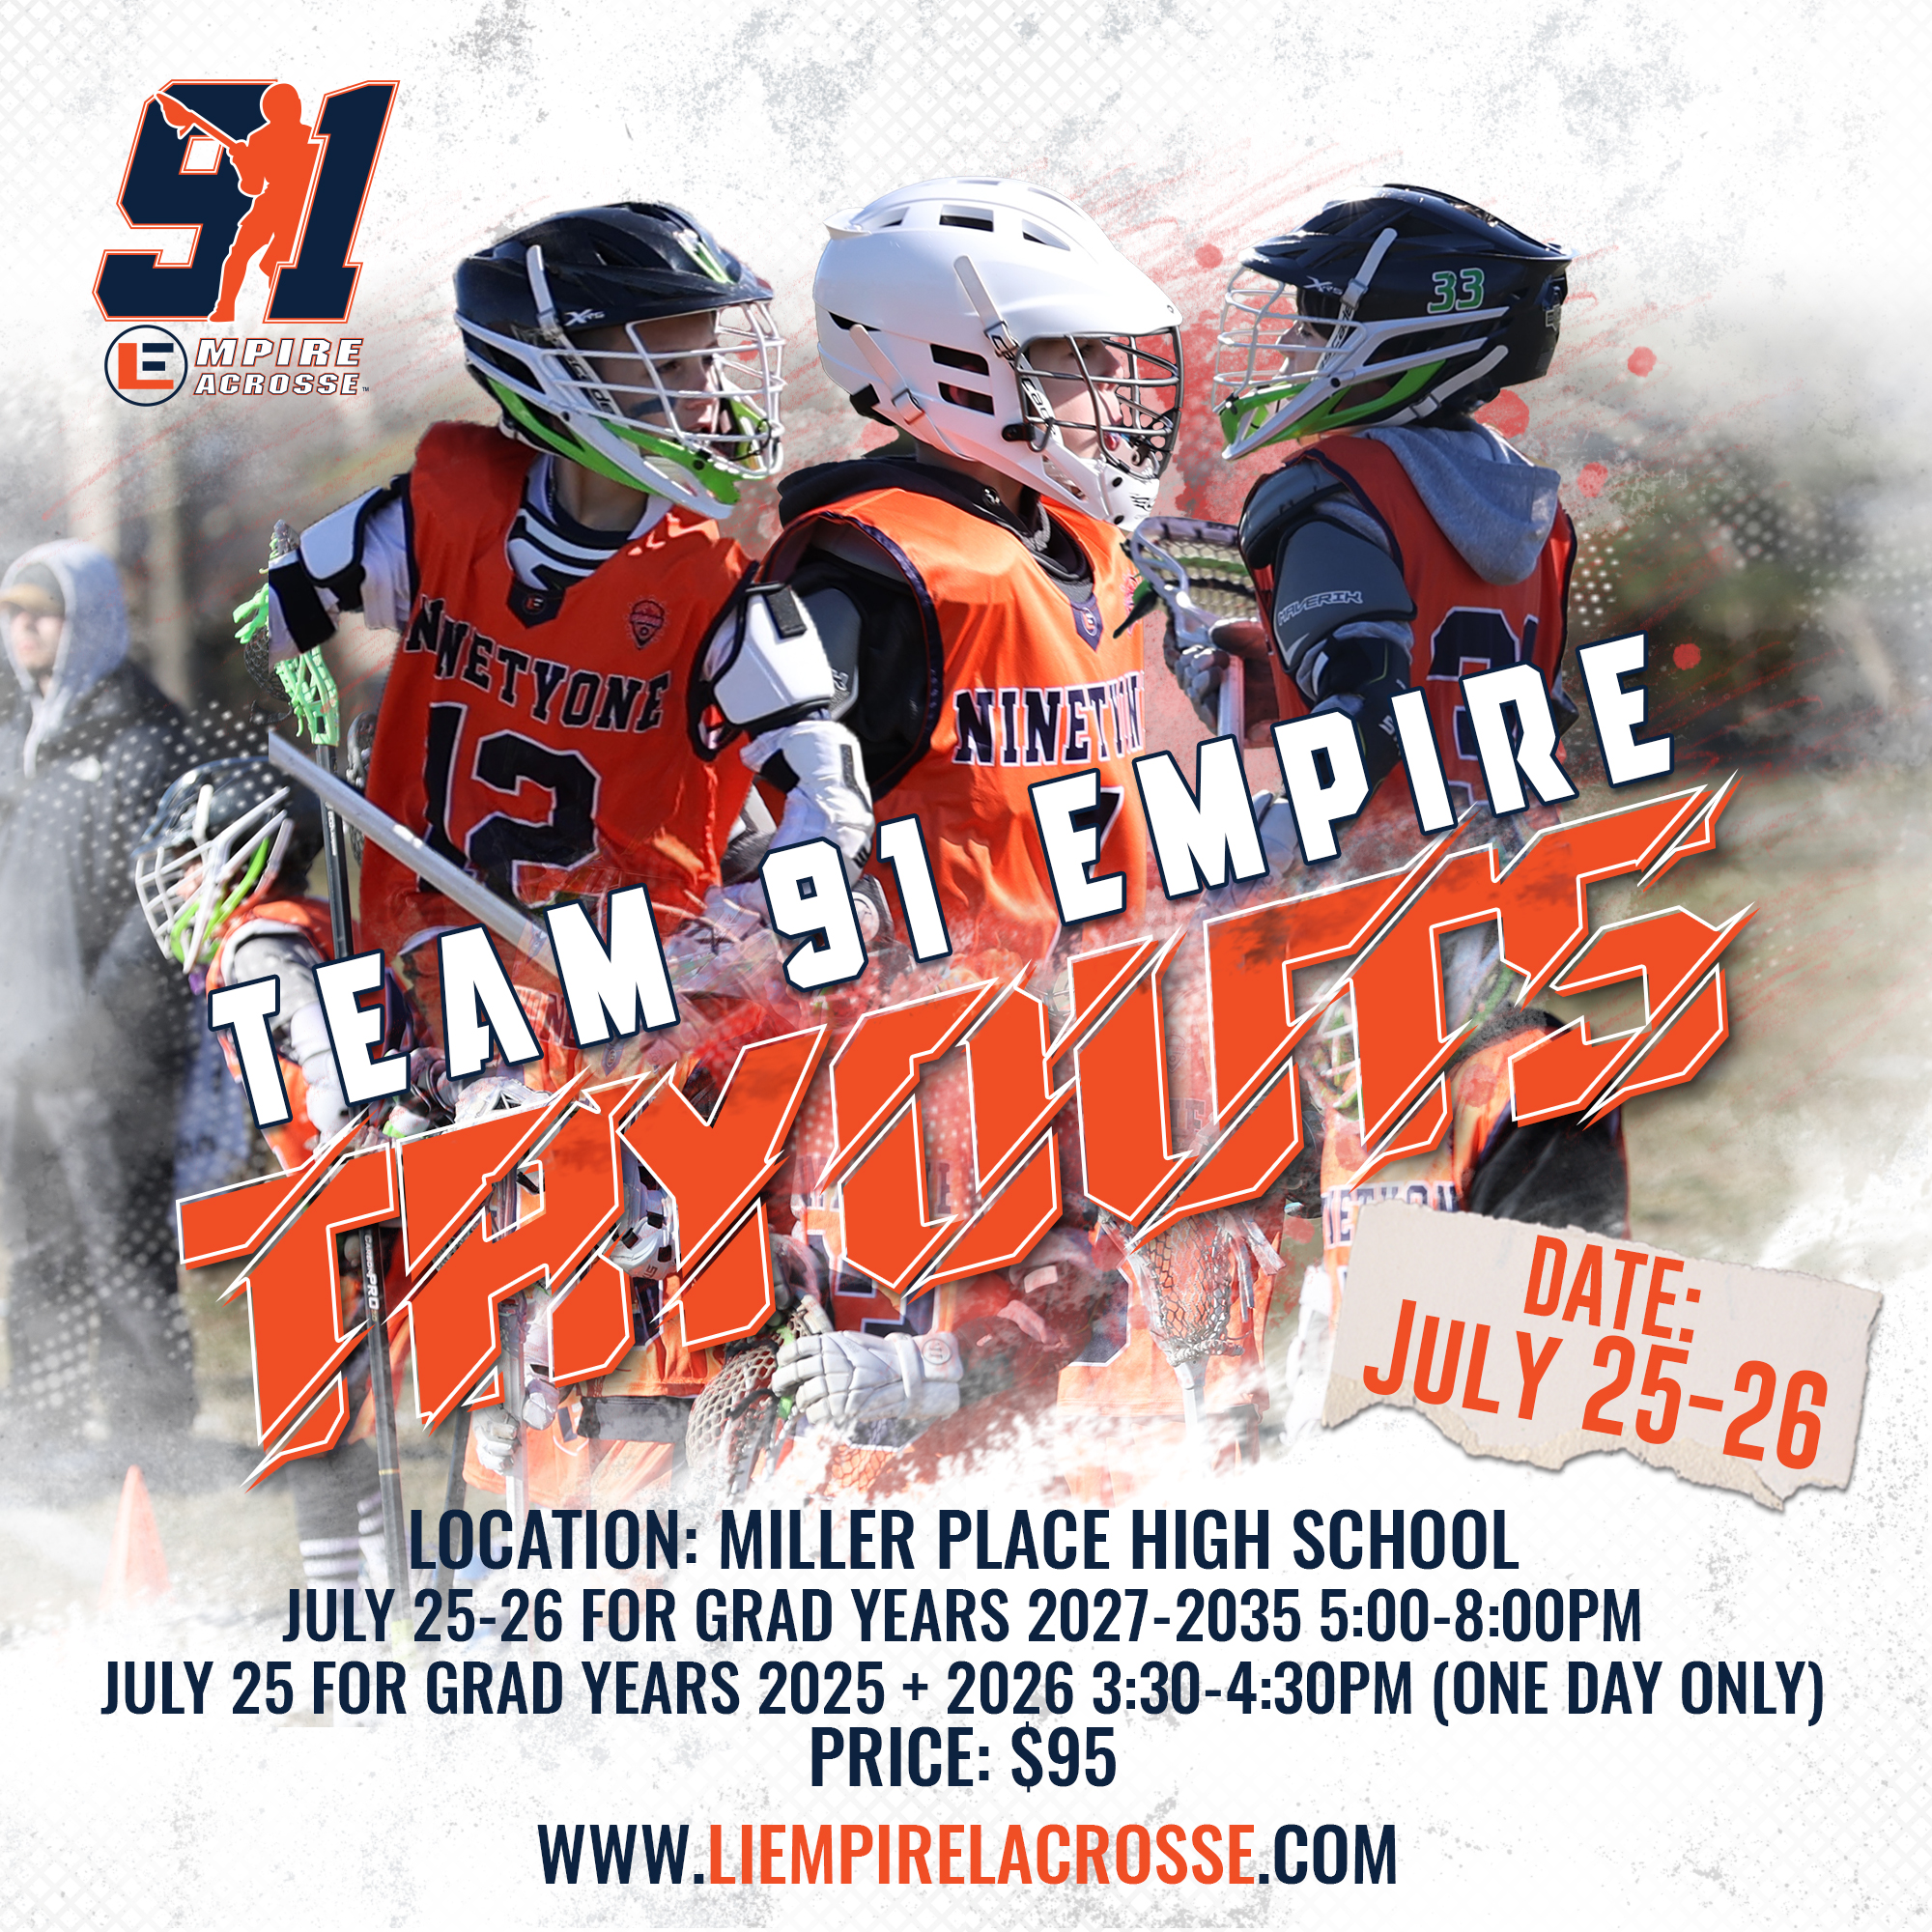 2023-Team91-Empire-Tryouts